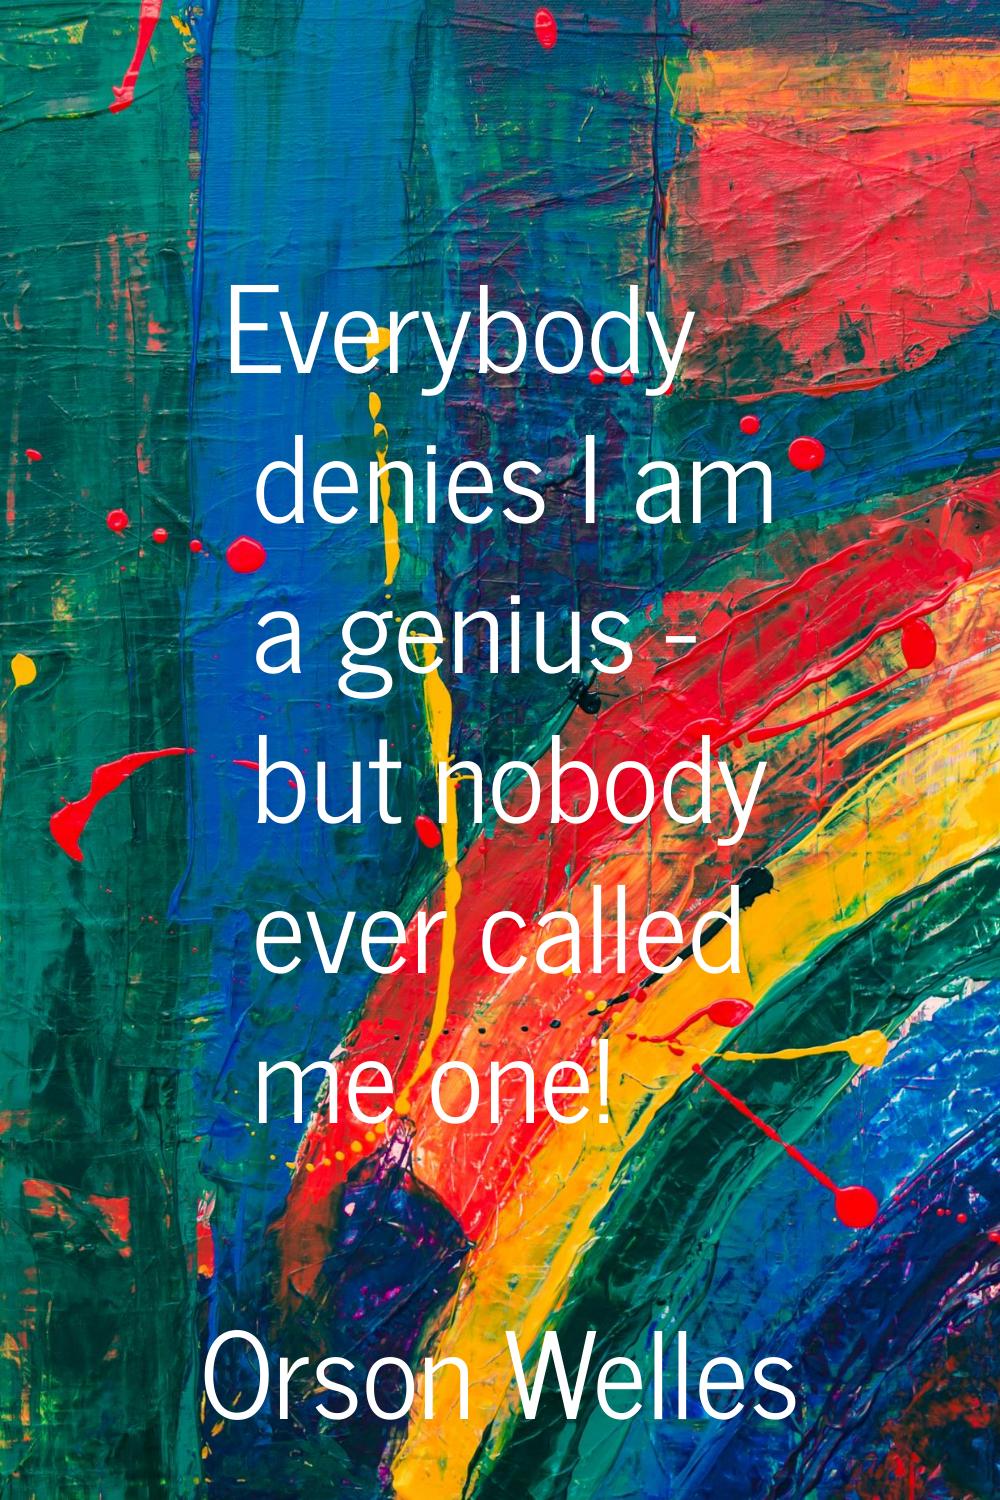 Everybody denies I am a genius - but nobody ever called me one!